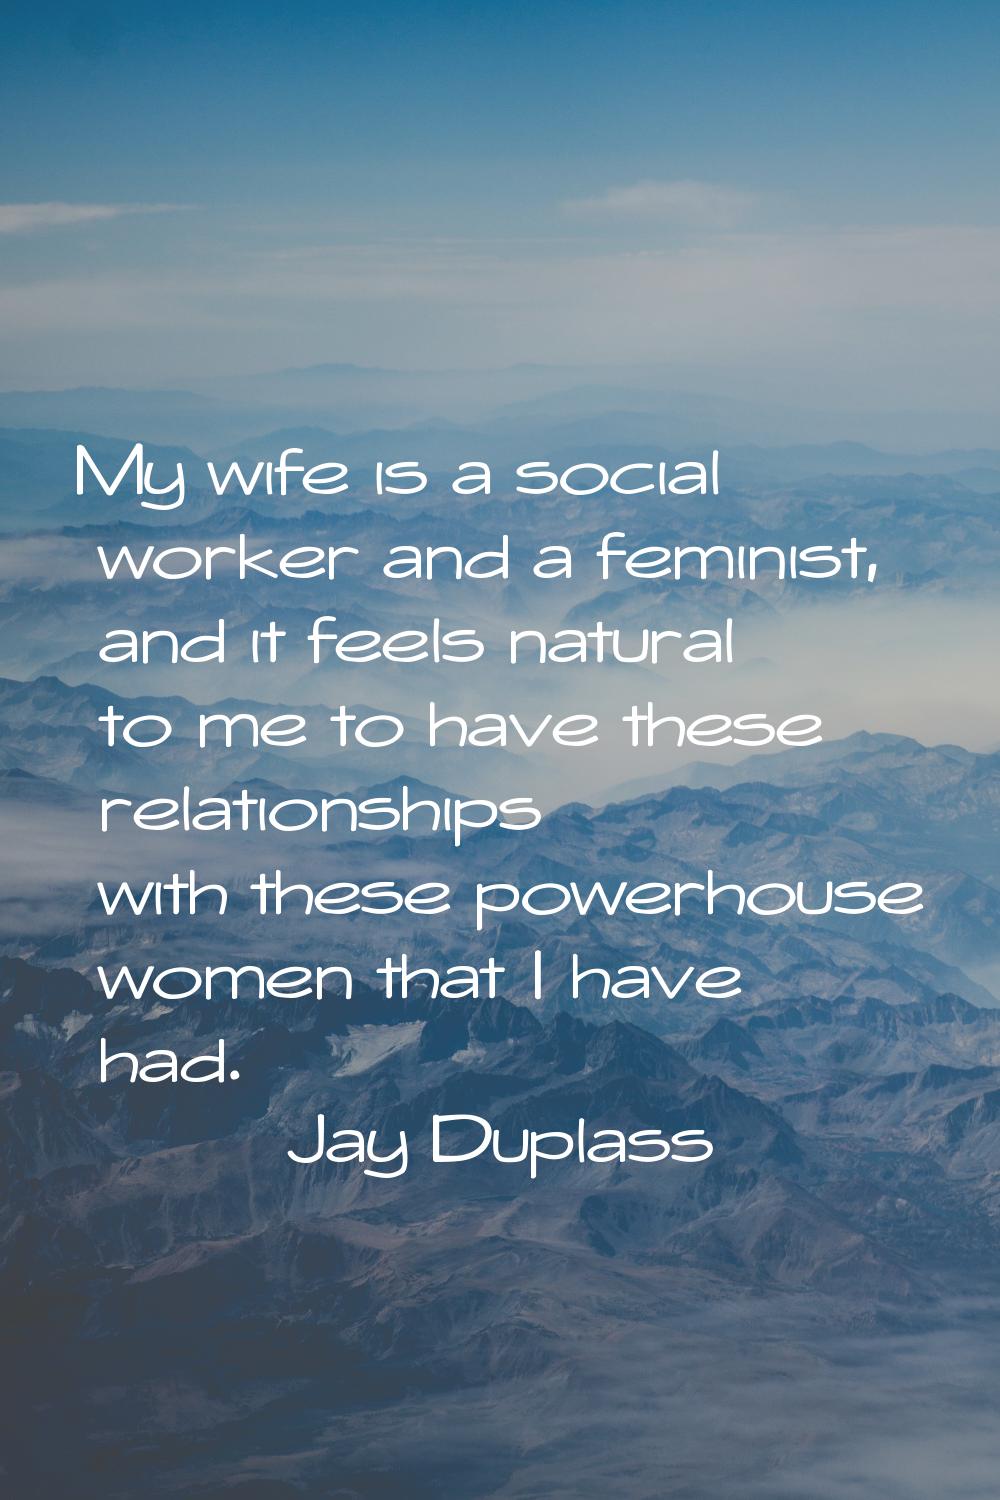 My wife is a social worker and a feminist, and it feels natural to me to have these relationships w